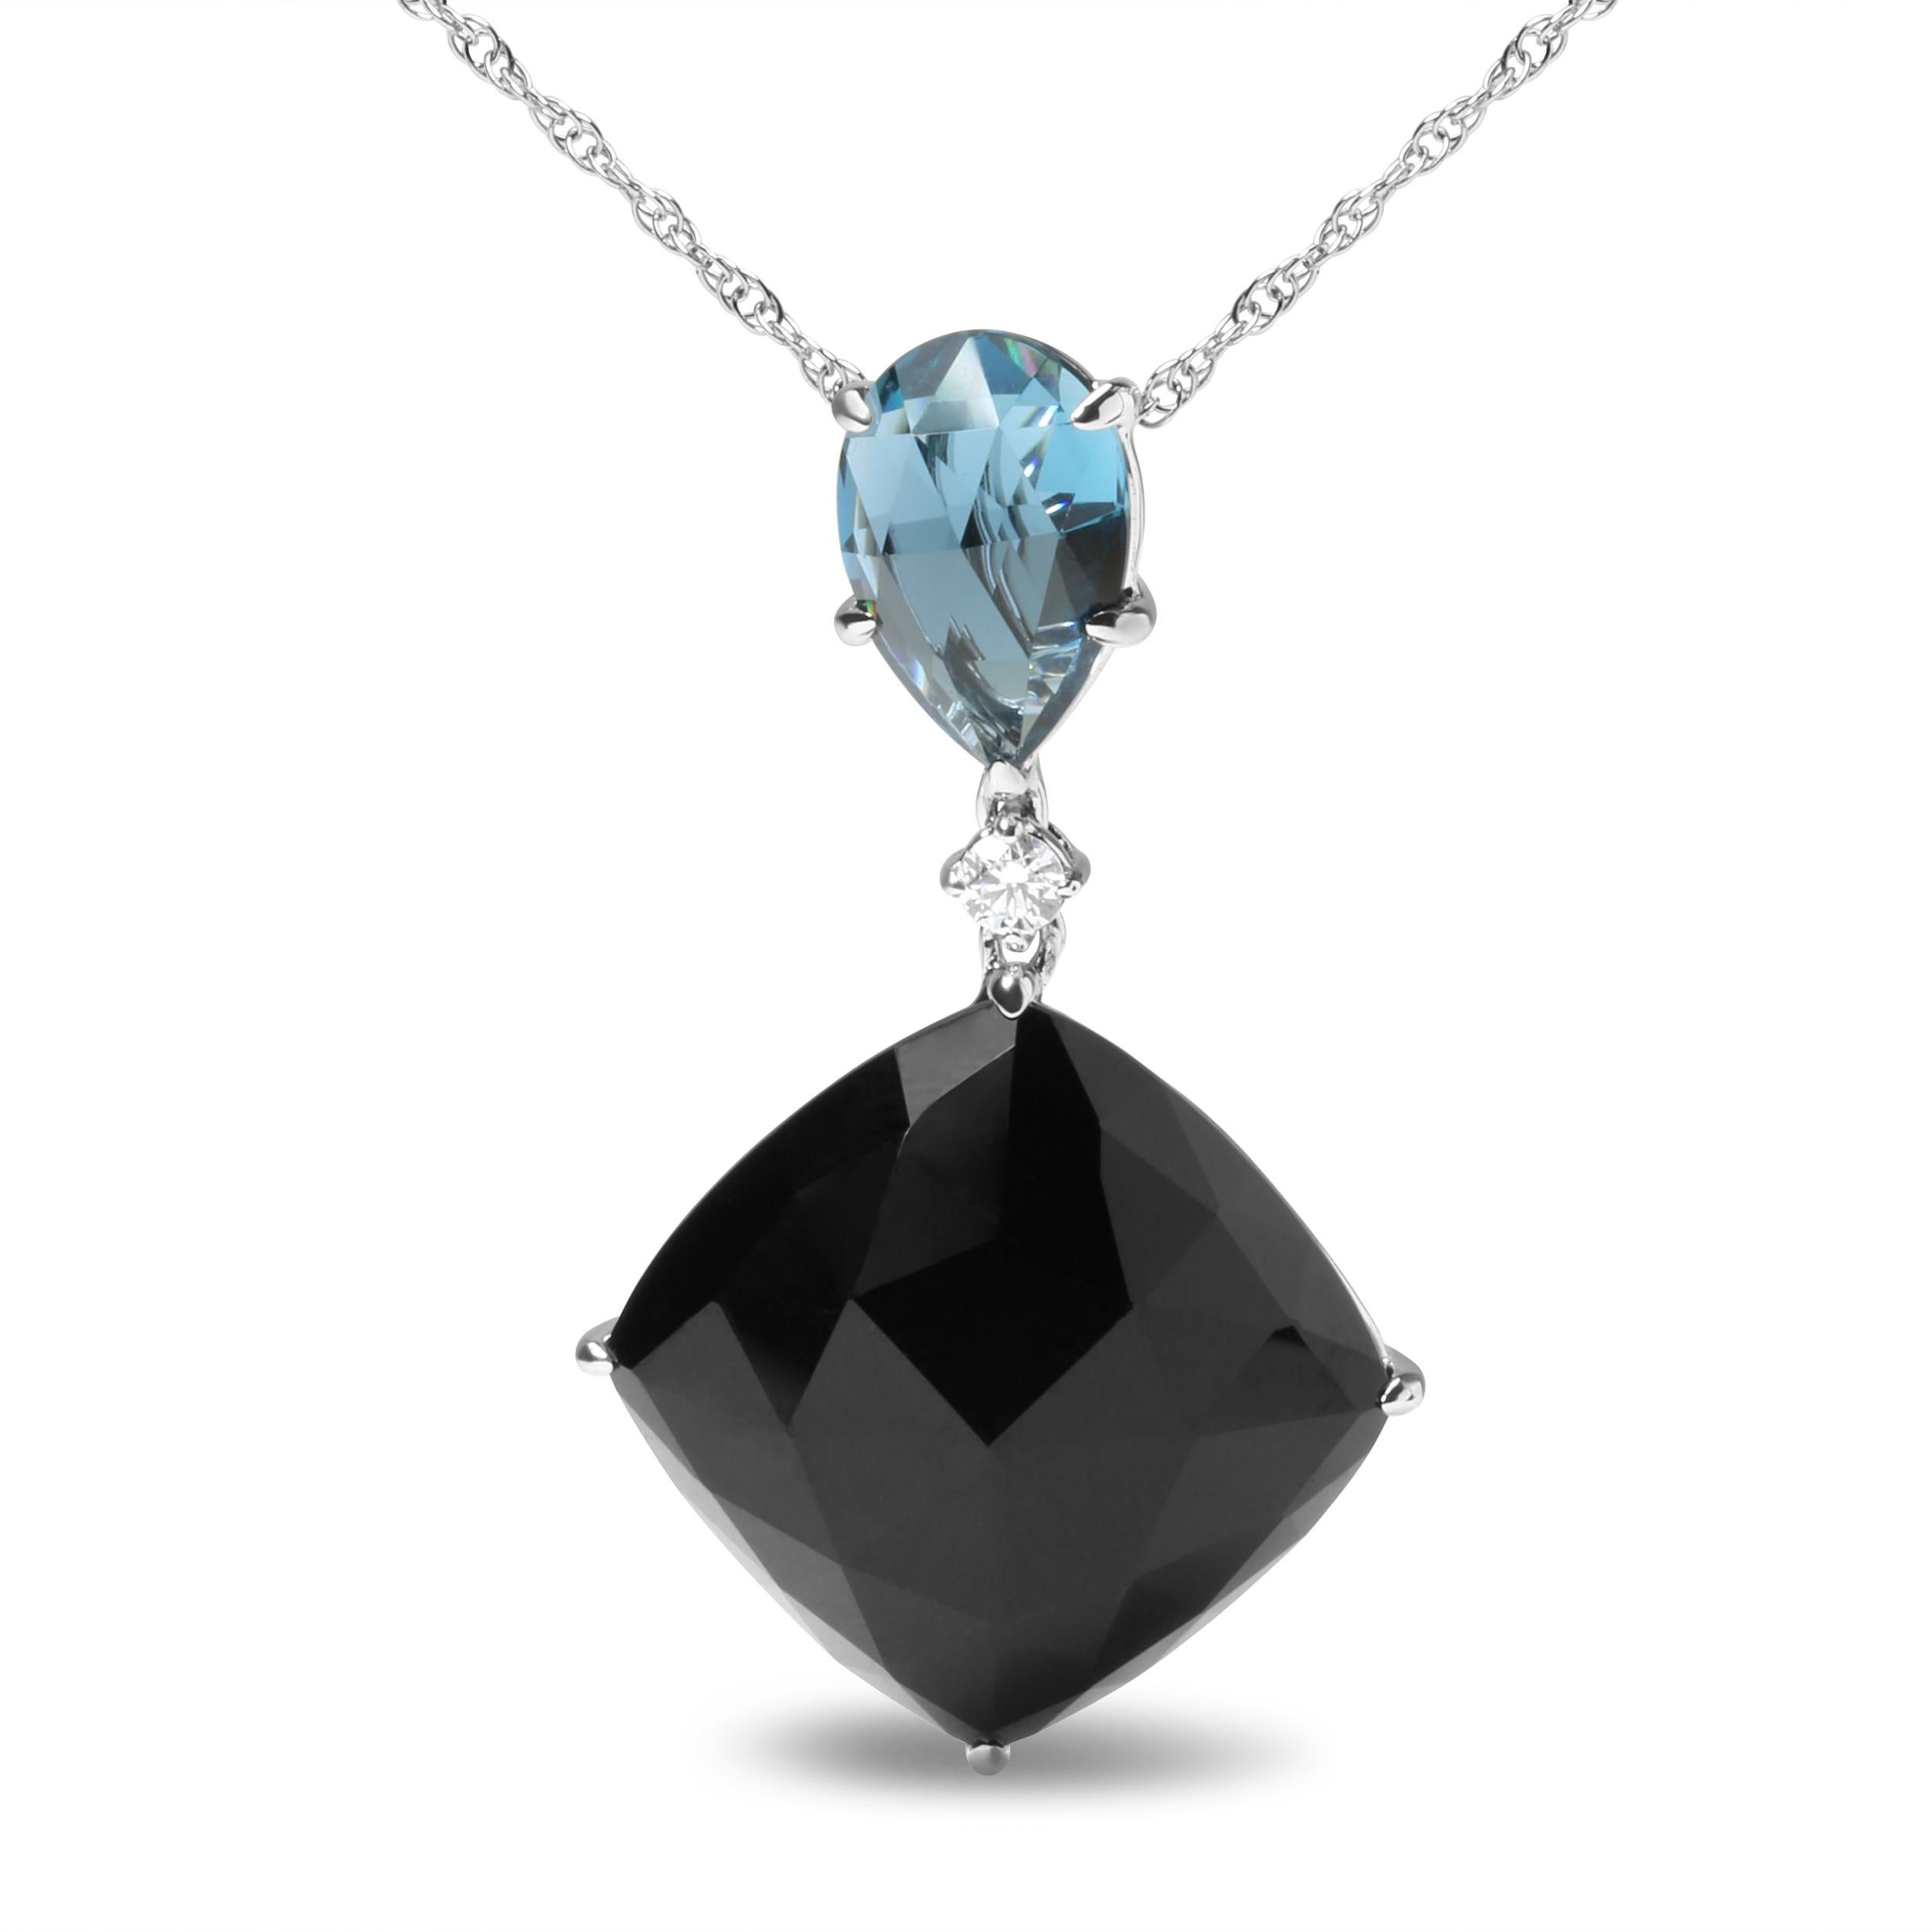 An exquisite design cast in 18k white gold, this pendant necklace is a stylish and sophisticated collaboration of colors to complement the neckline. This piece starts with a natural 12x8mm pear cut heat-treated London blue topaz nestled within a